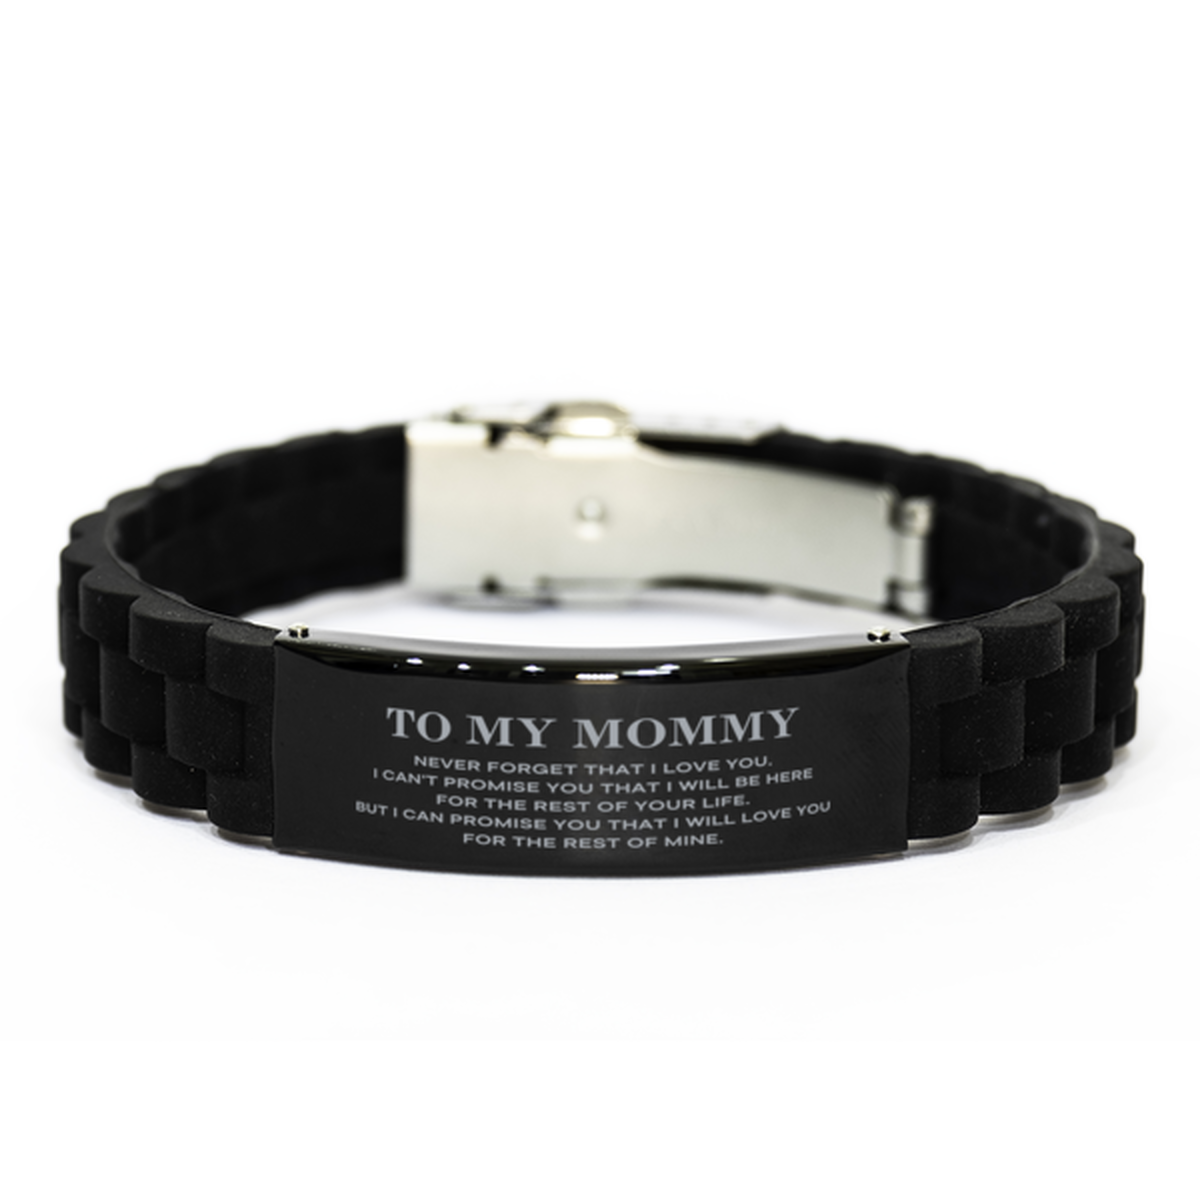 To My Mommy Gifts, I will love you for the rest of mine, Love Mommy Bracelet, Birthday Christmas Unique Black Glidelock Clasp Bracelet For Mommy